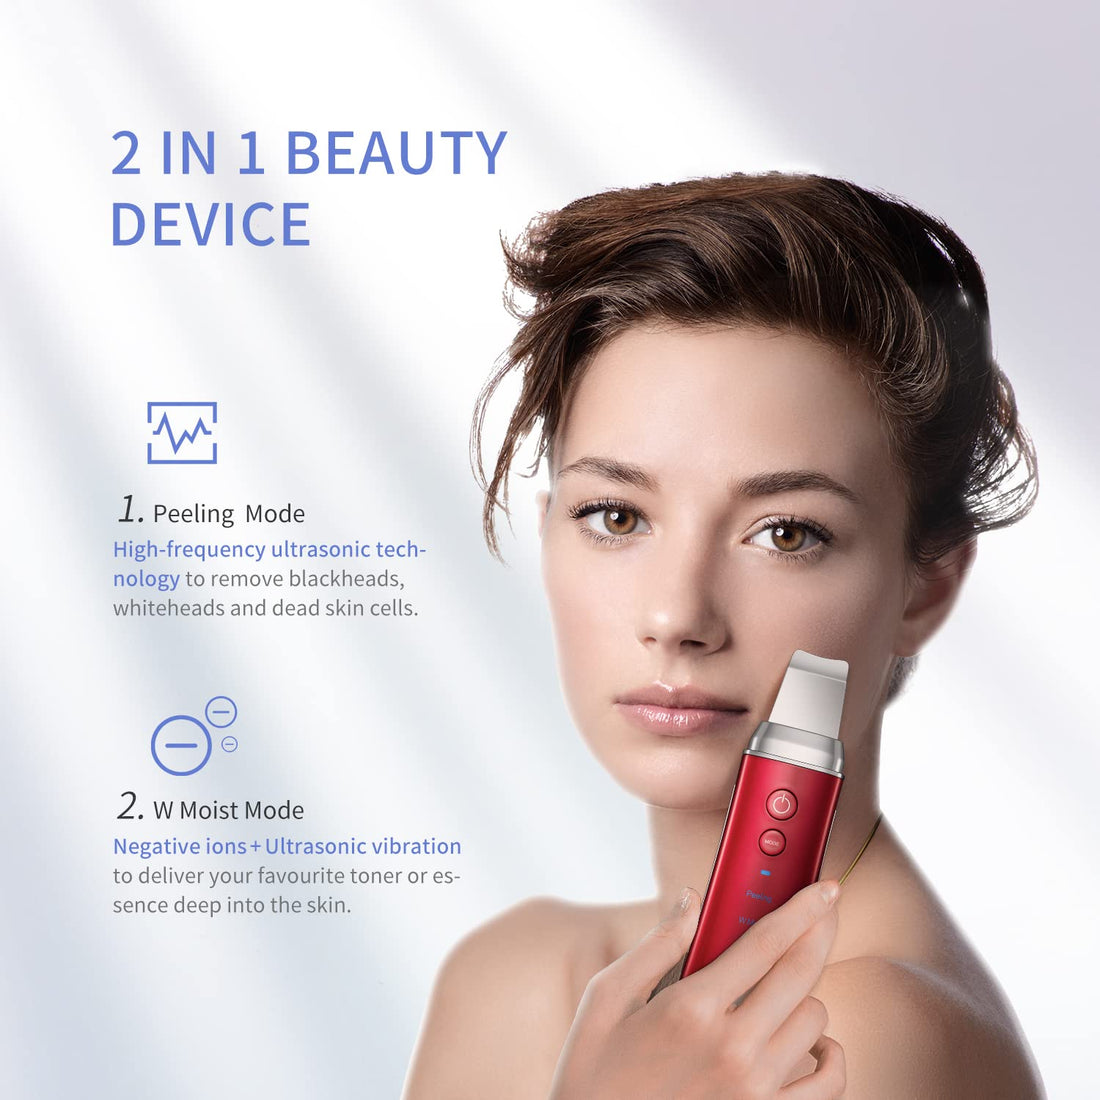 Ultrasonic Skin Scrubber Skin Spatula, COSBEAUTY Versatile Skincare Device for Exfoliating | Blackhead Remover Tool | 28Khz Vibrations, Wireless Charging, IPX5 Waterproof(CB-035, Red)